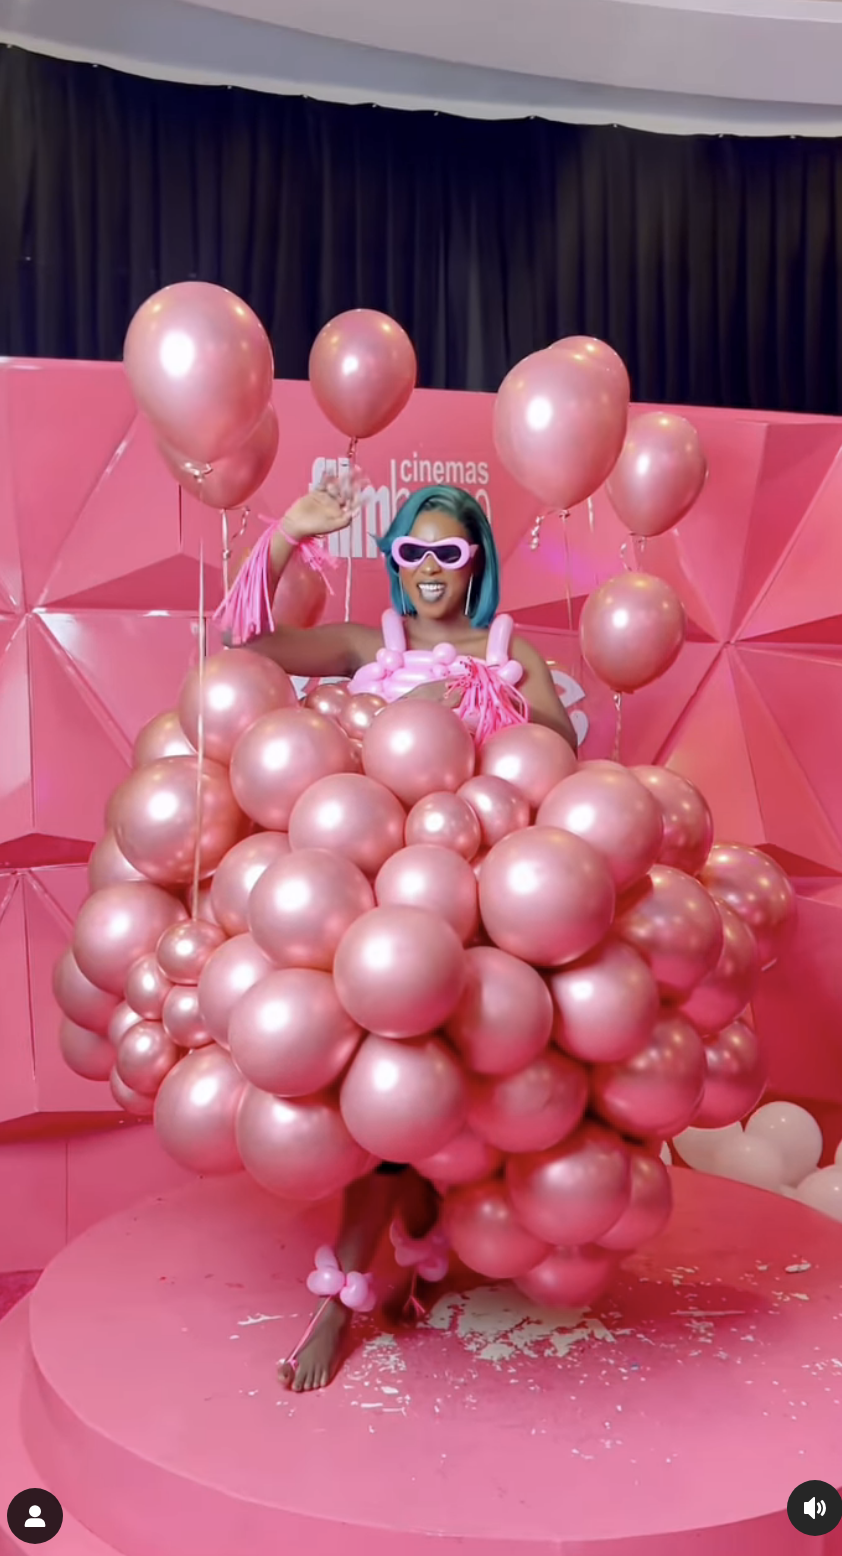 wearing a dress made of balloons